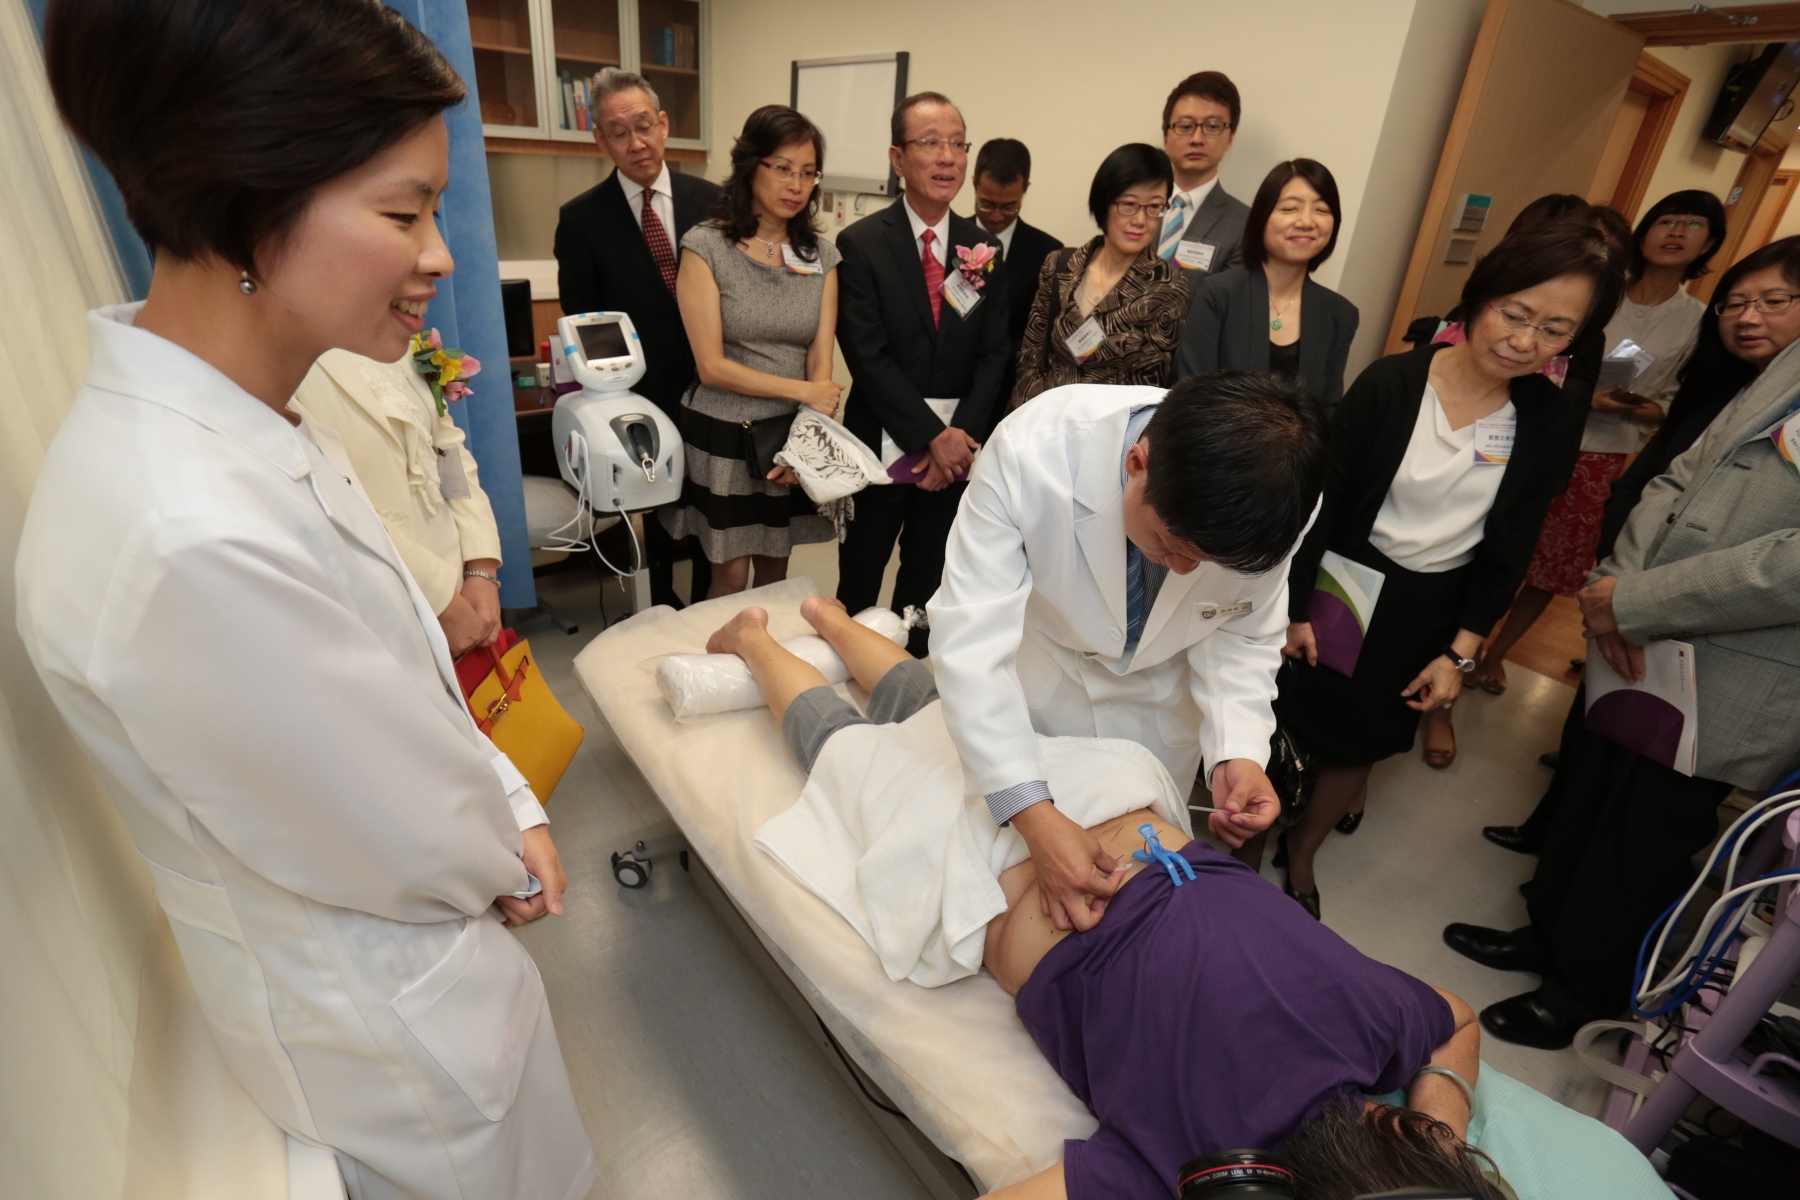 Medical practitioners of HKIIM explain the integrated medicine